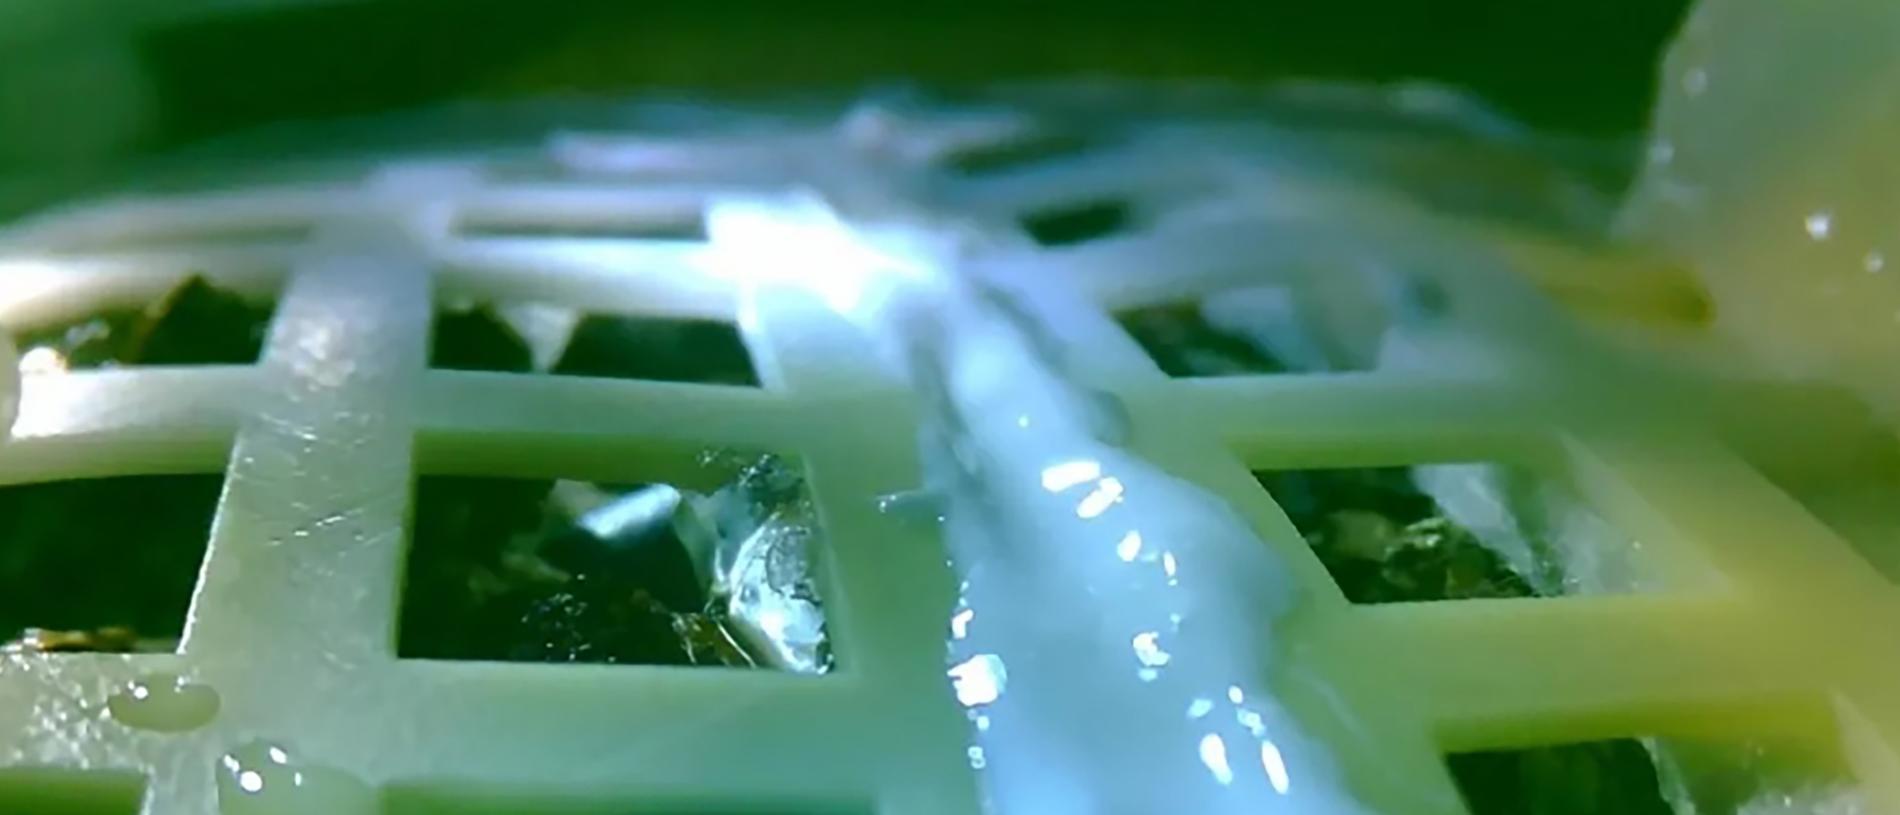 The cotton sprout grew in a lattice-structured container inside the Chang’e-4 moon probe.